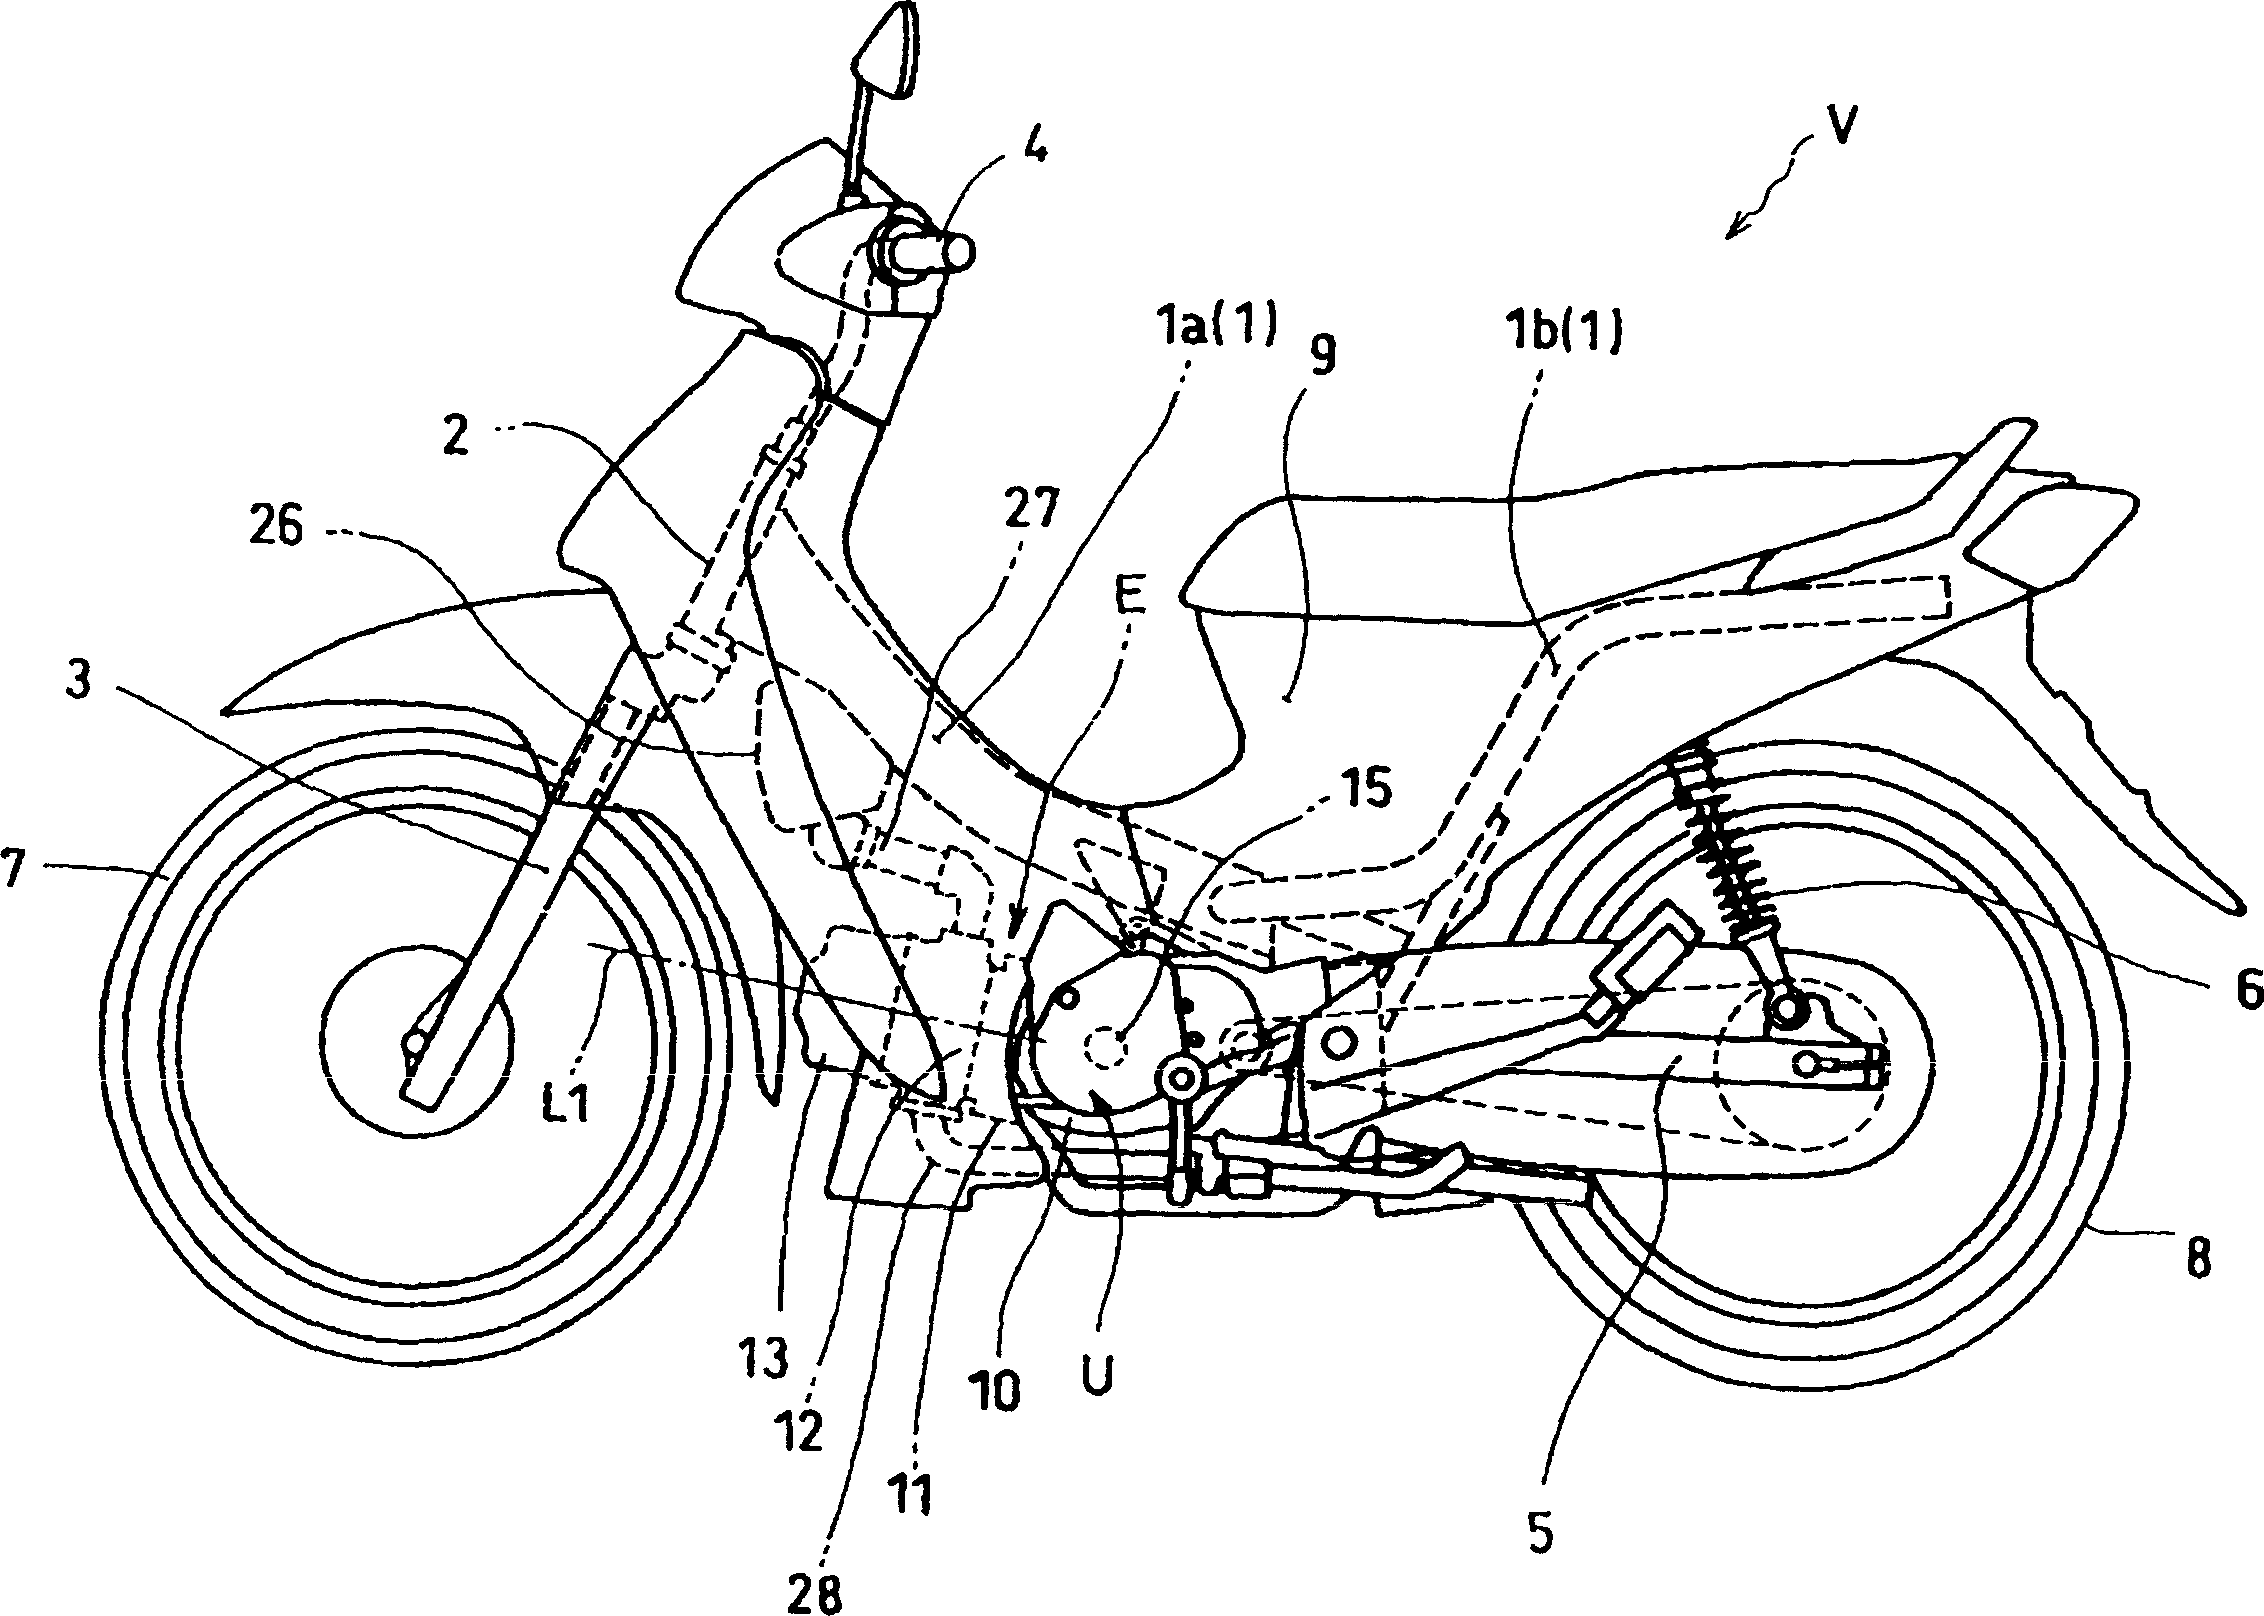 Valve operating device for internal combustion engine